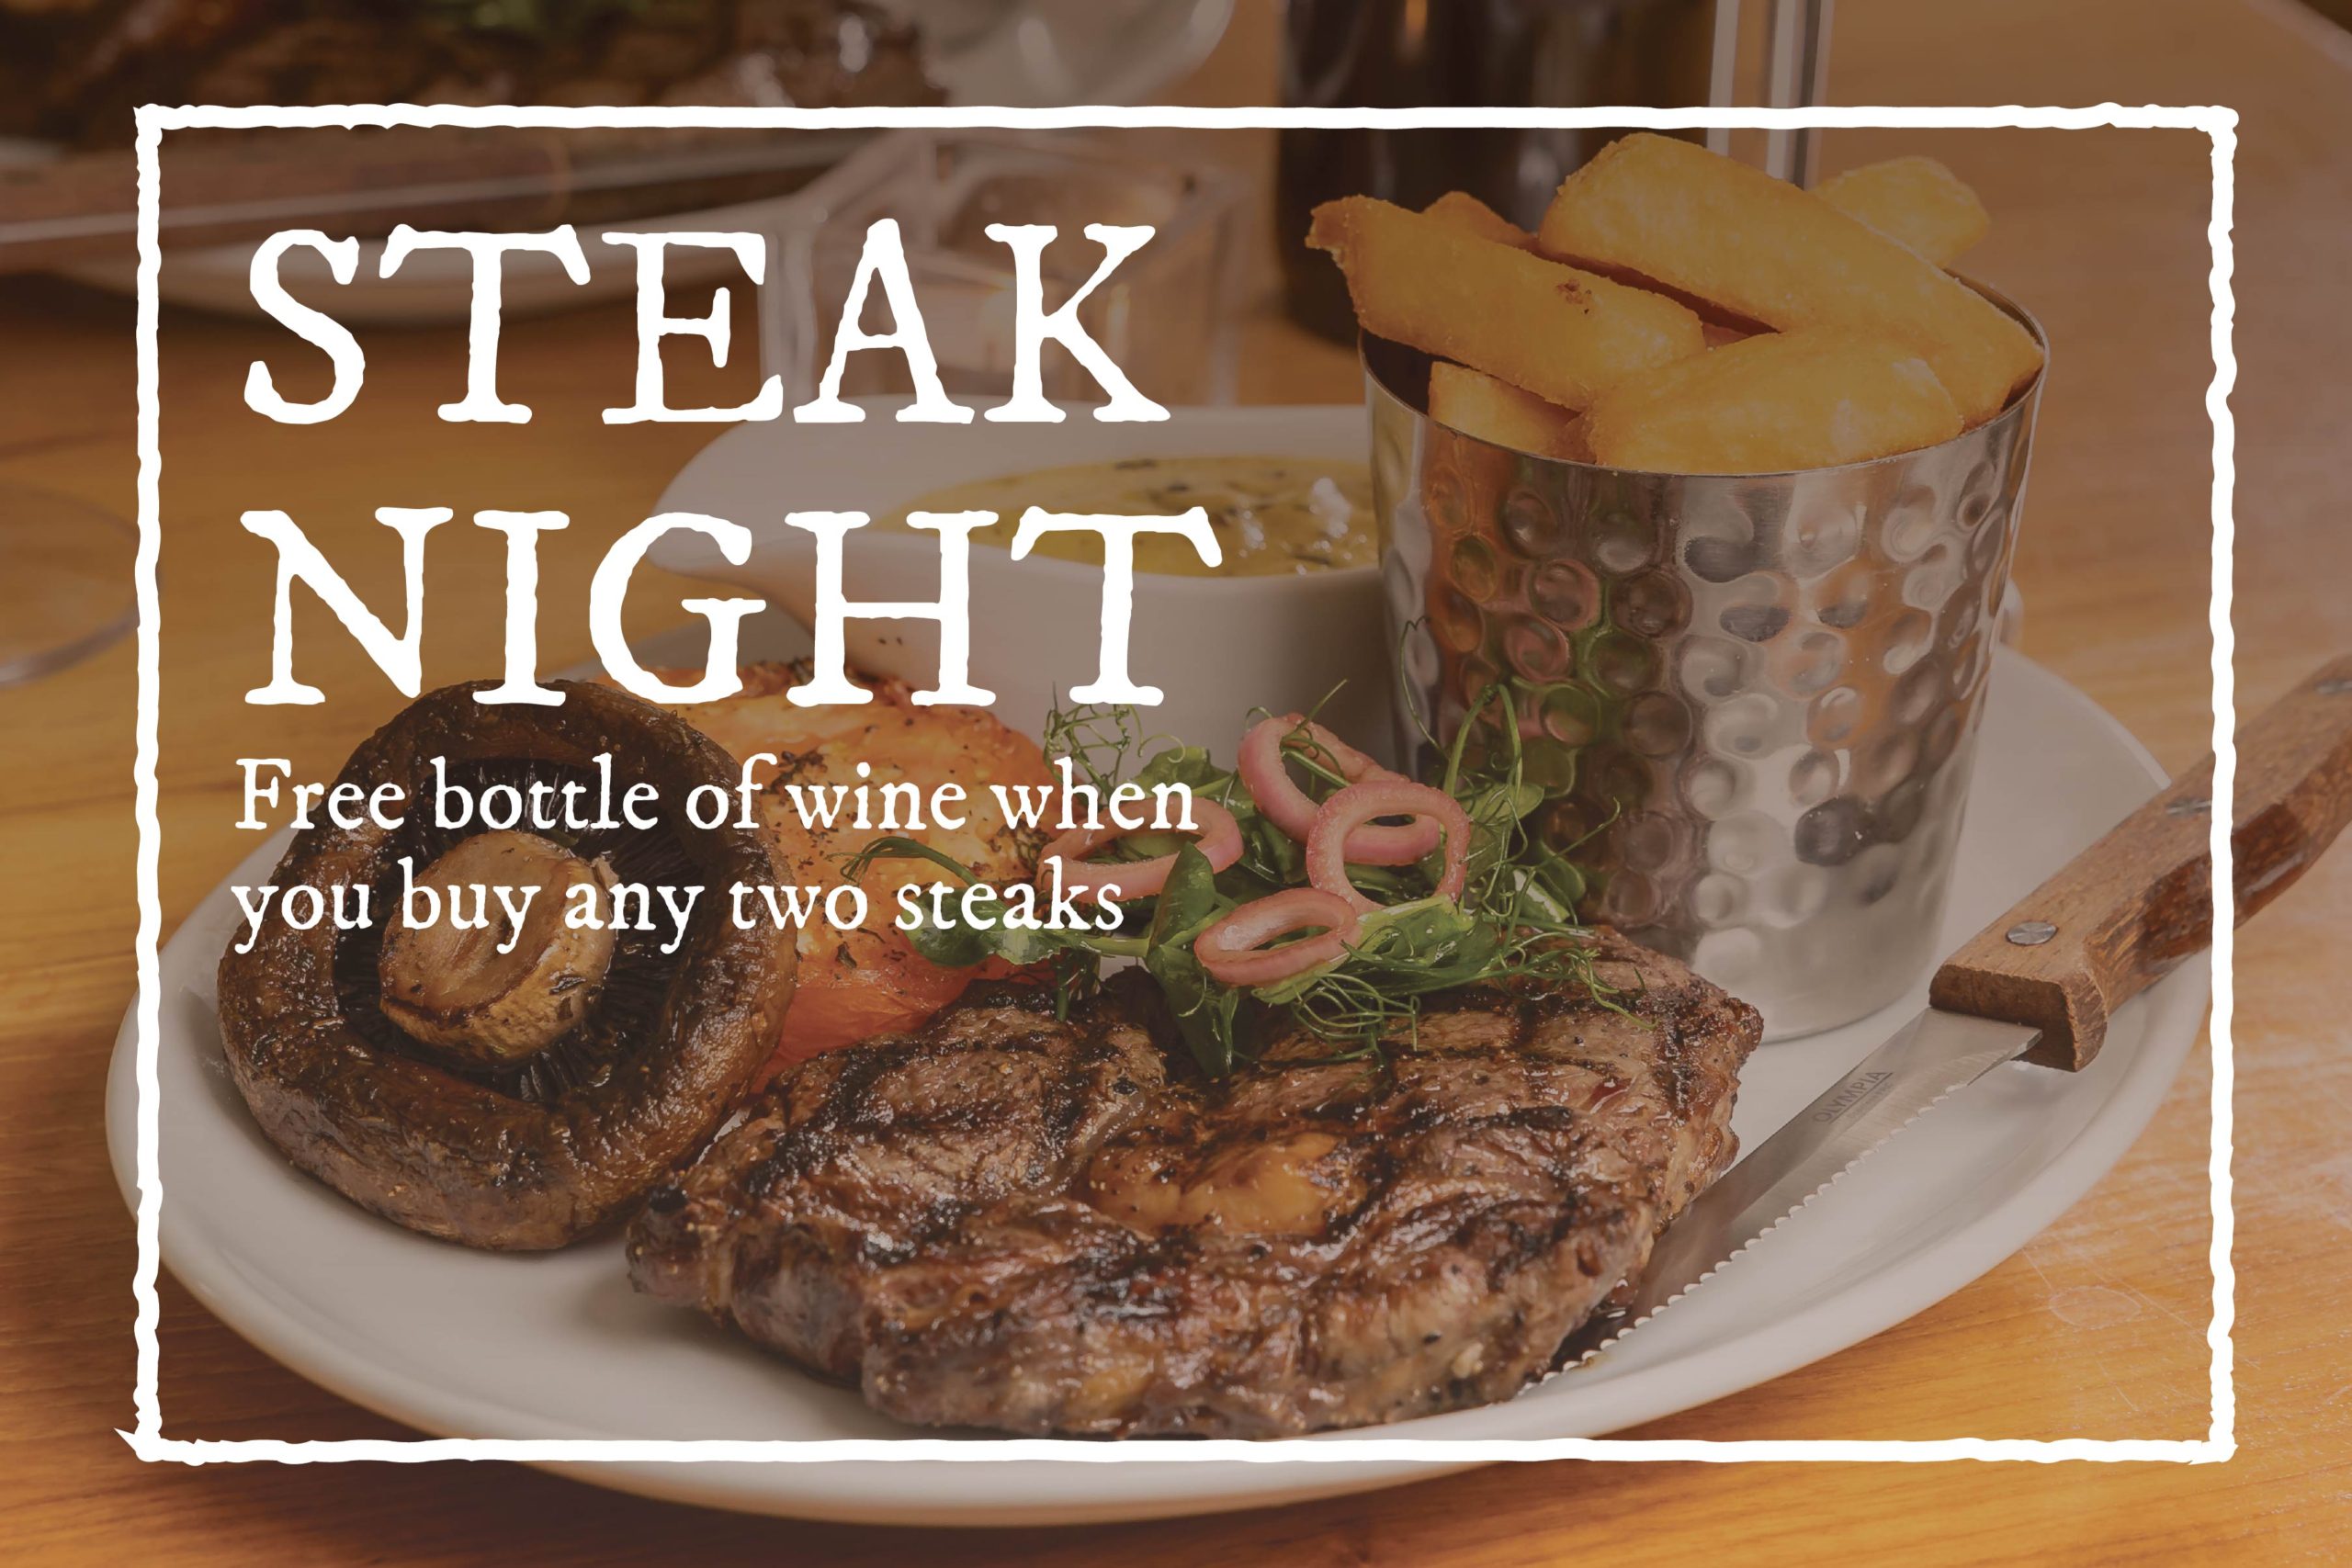 Steak Night every Wednesday from 5:30pm